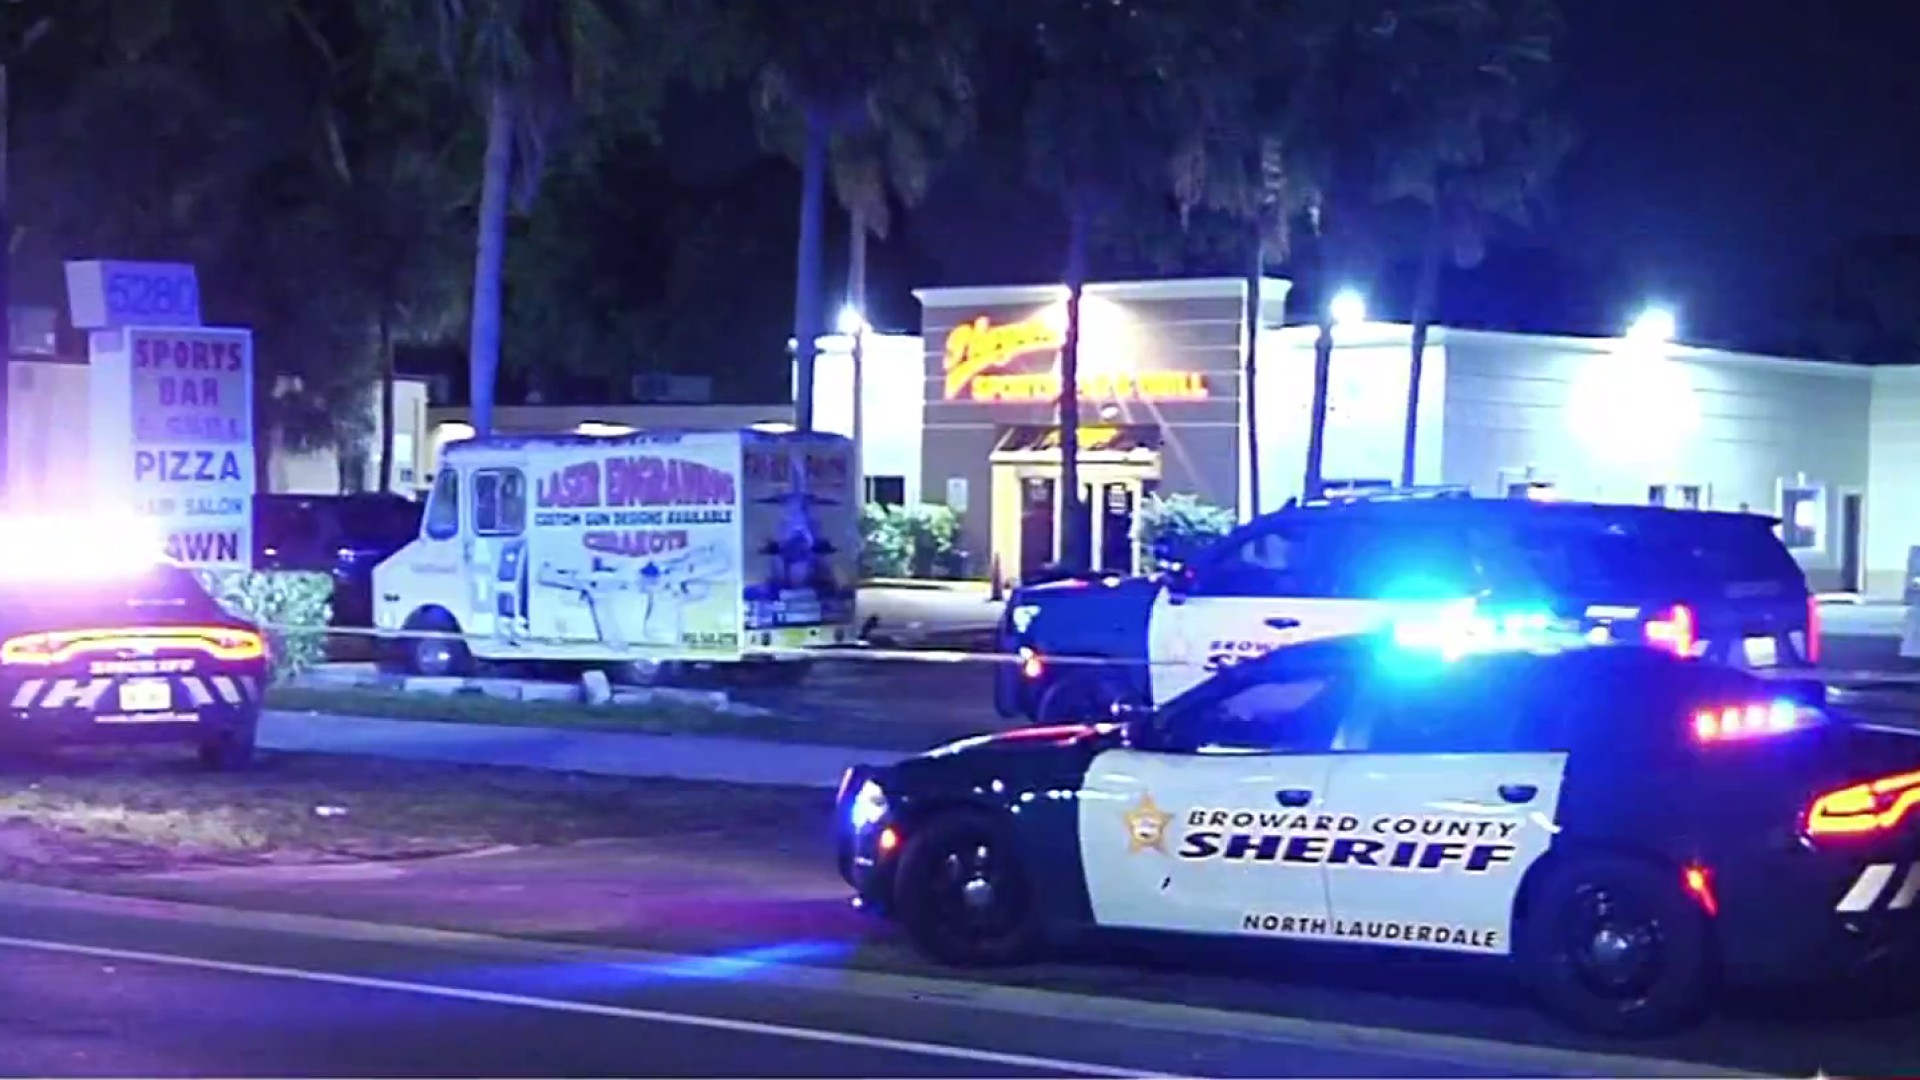 Fatal Shooting Leaves One Dead and Two Injured in North Lauderdale – NBC 6 South Florida